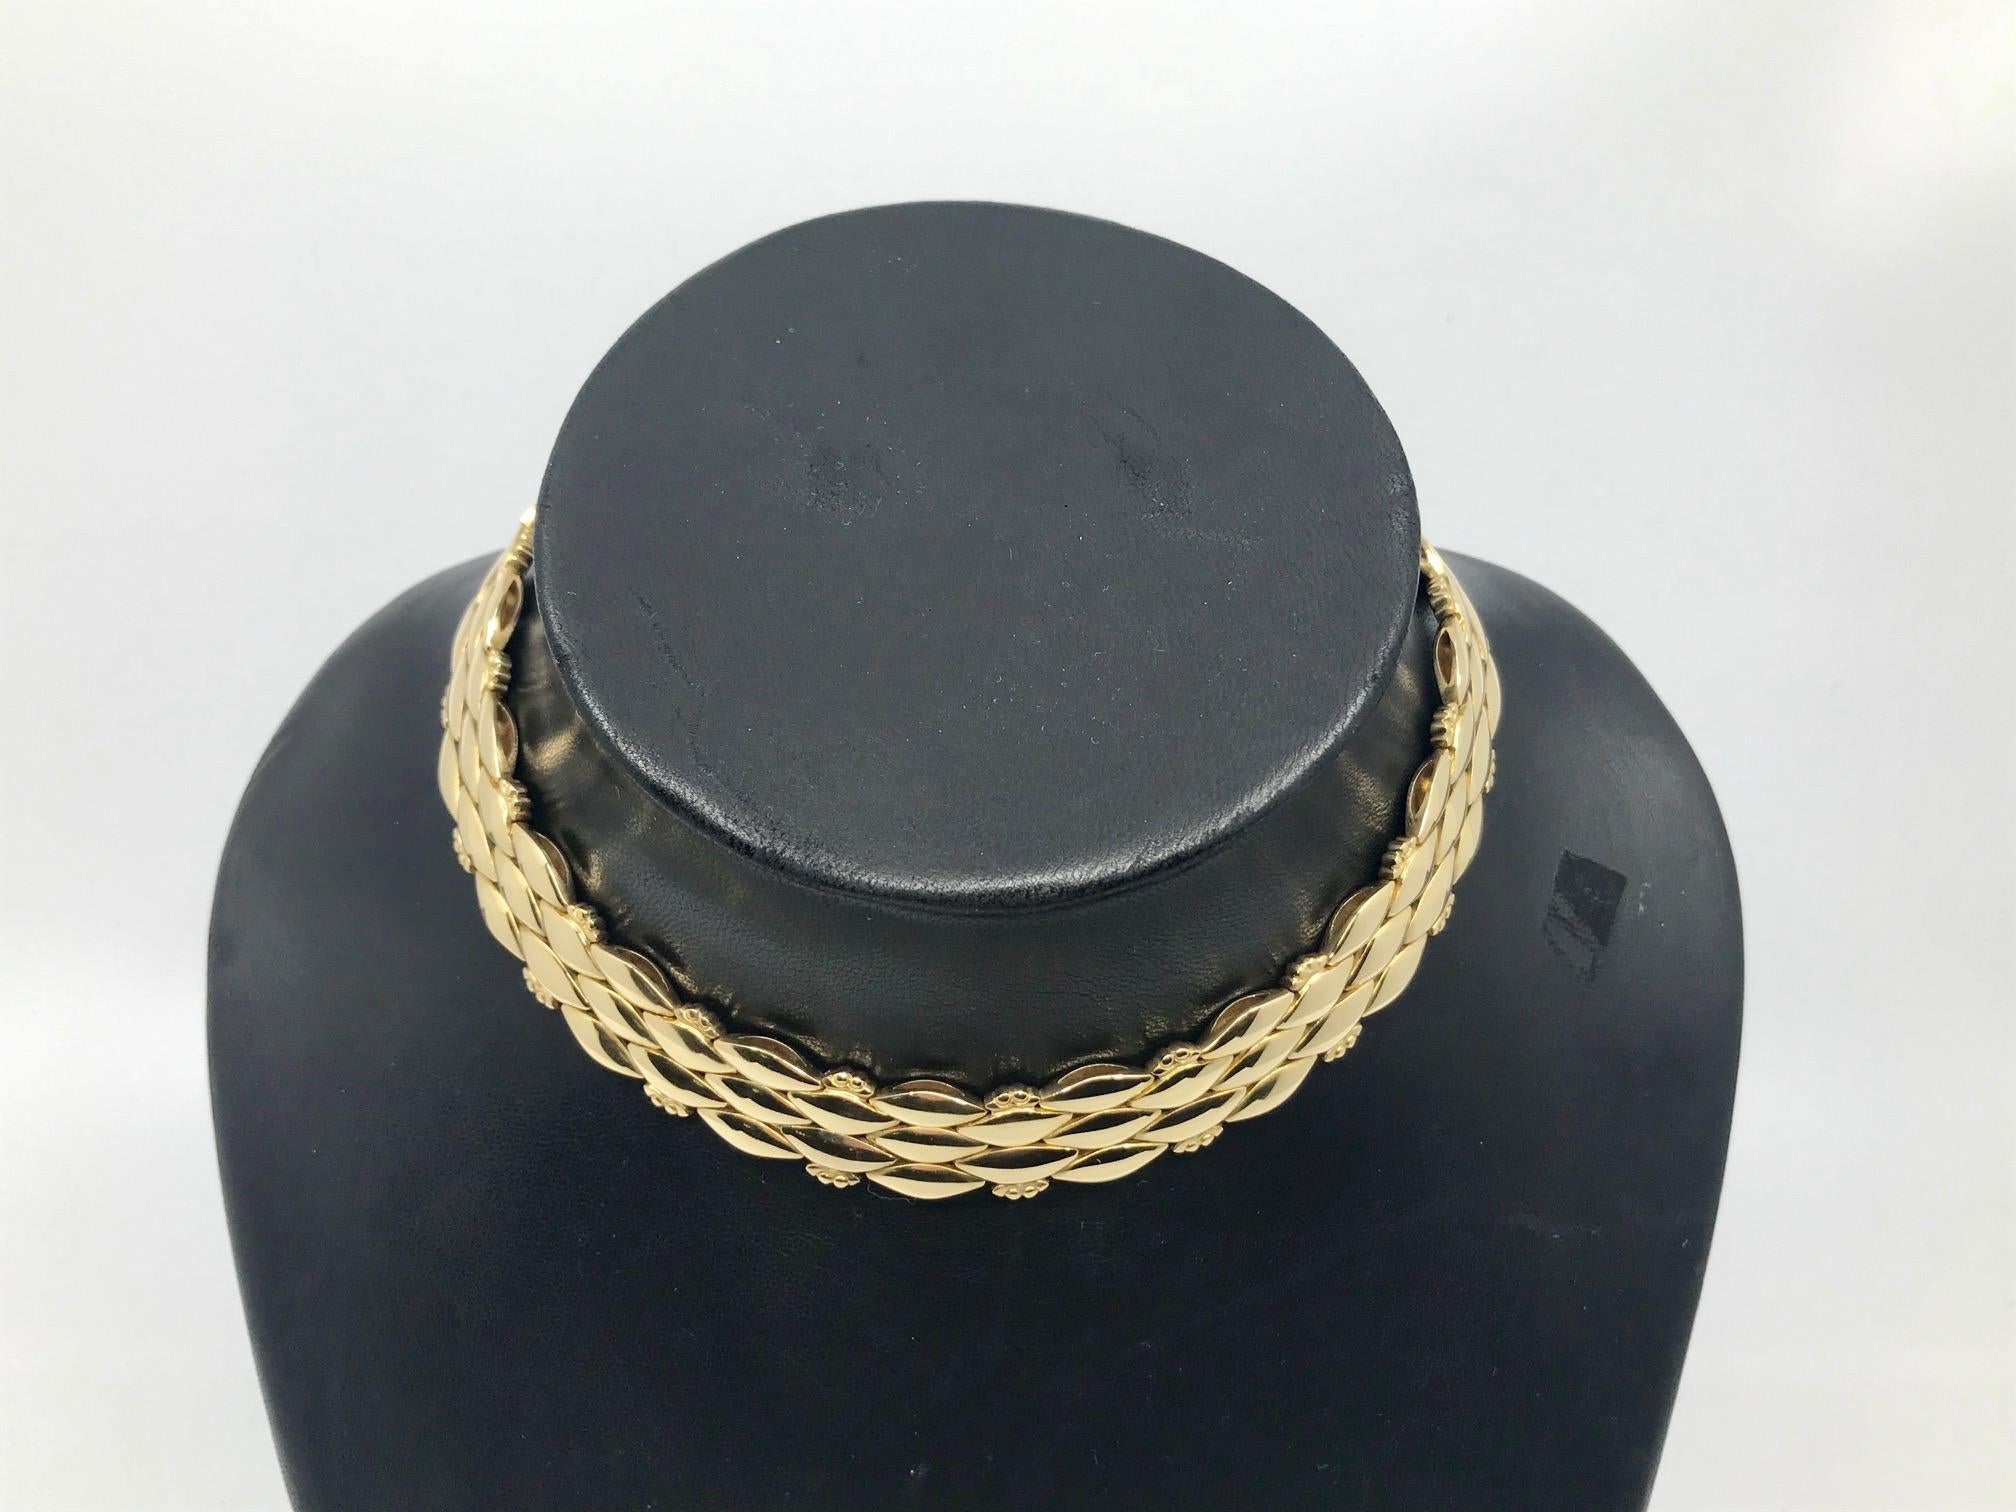 This is an elegant 18kt gold Georg Jensen collier #1086, design by Harald Nielsen from 1945. This piece is no longer made as it is so time consuming and expensive to make.
Measures 14 1/4